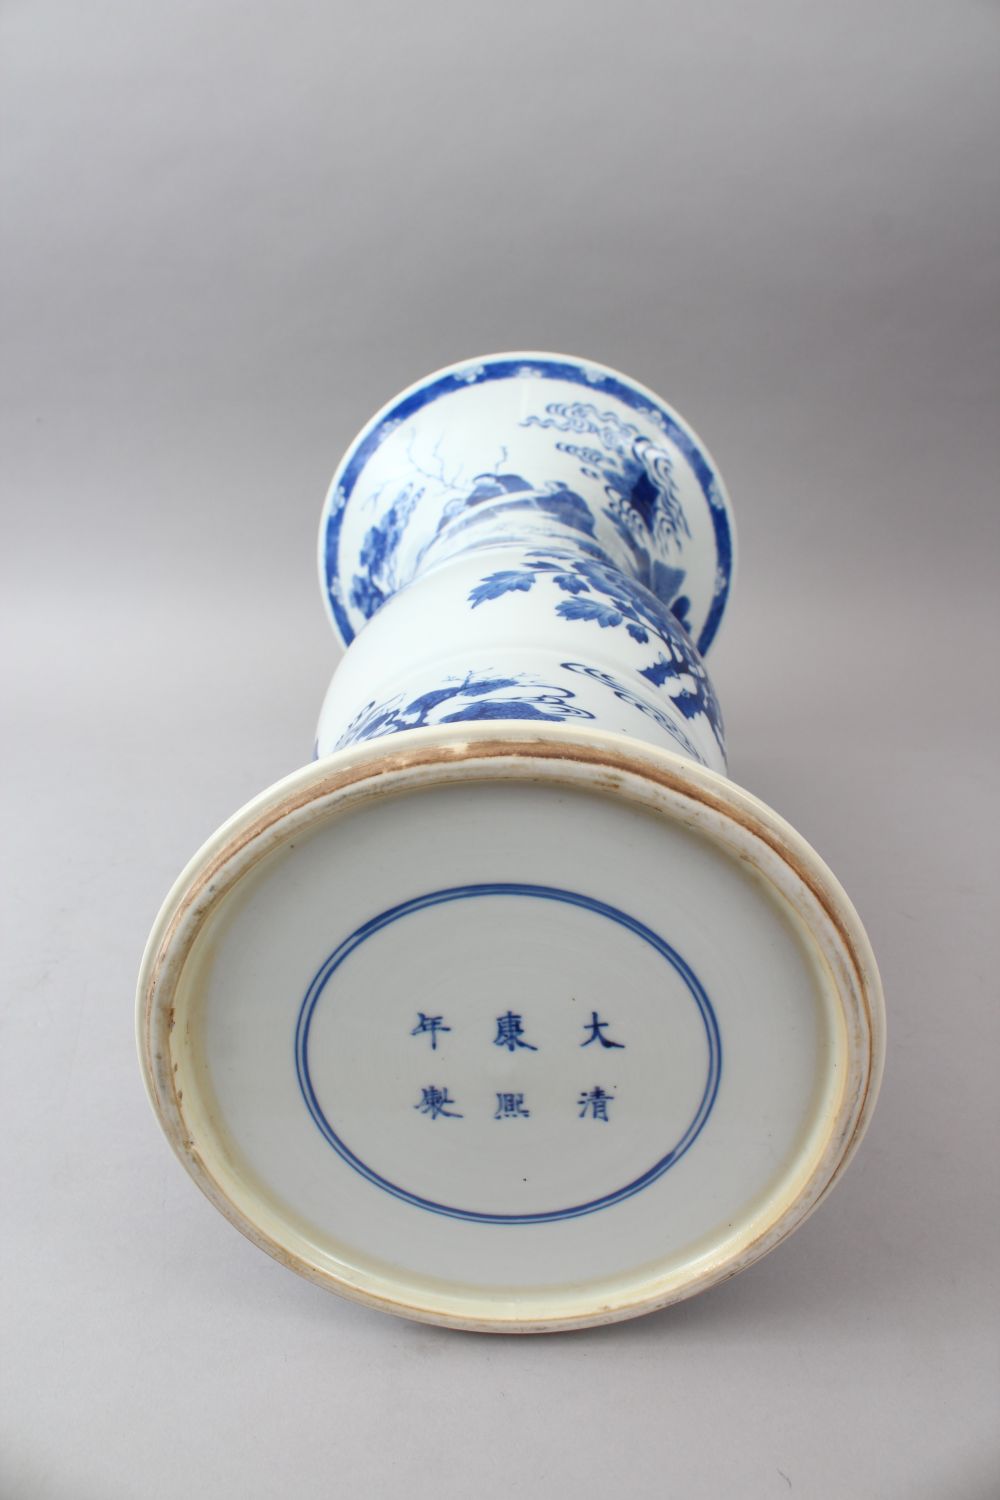 A LARGE CHINESE BLUE & WHITE PORCELAIN YEN YEN VASE, the body of the vase decorated with scenes of - Image 6 of 7